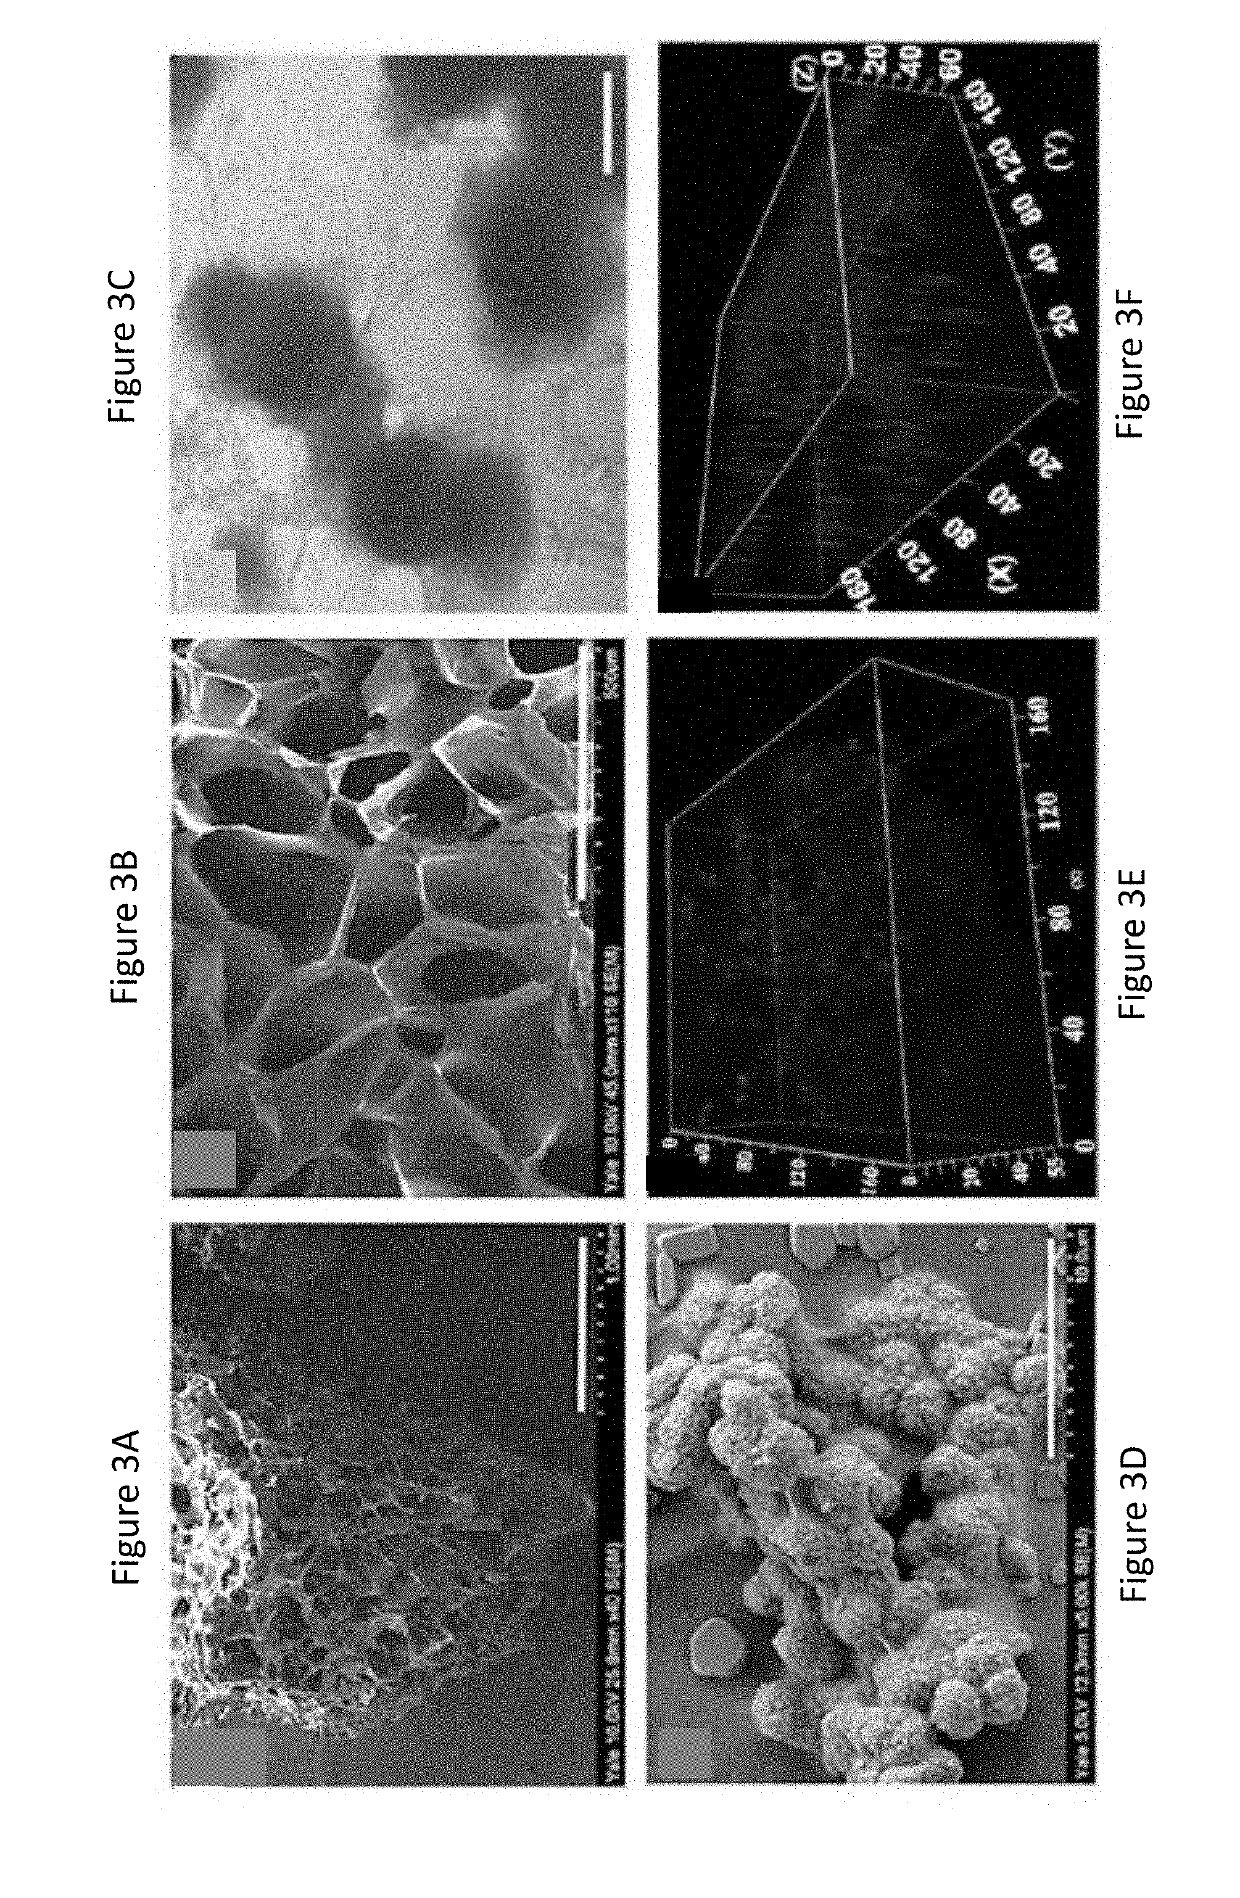 Composition and methods for culturing retinal progenitor cells